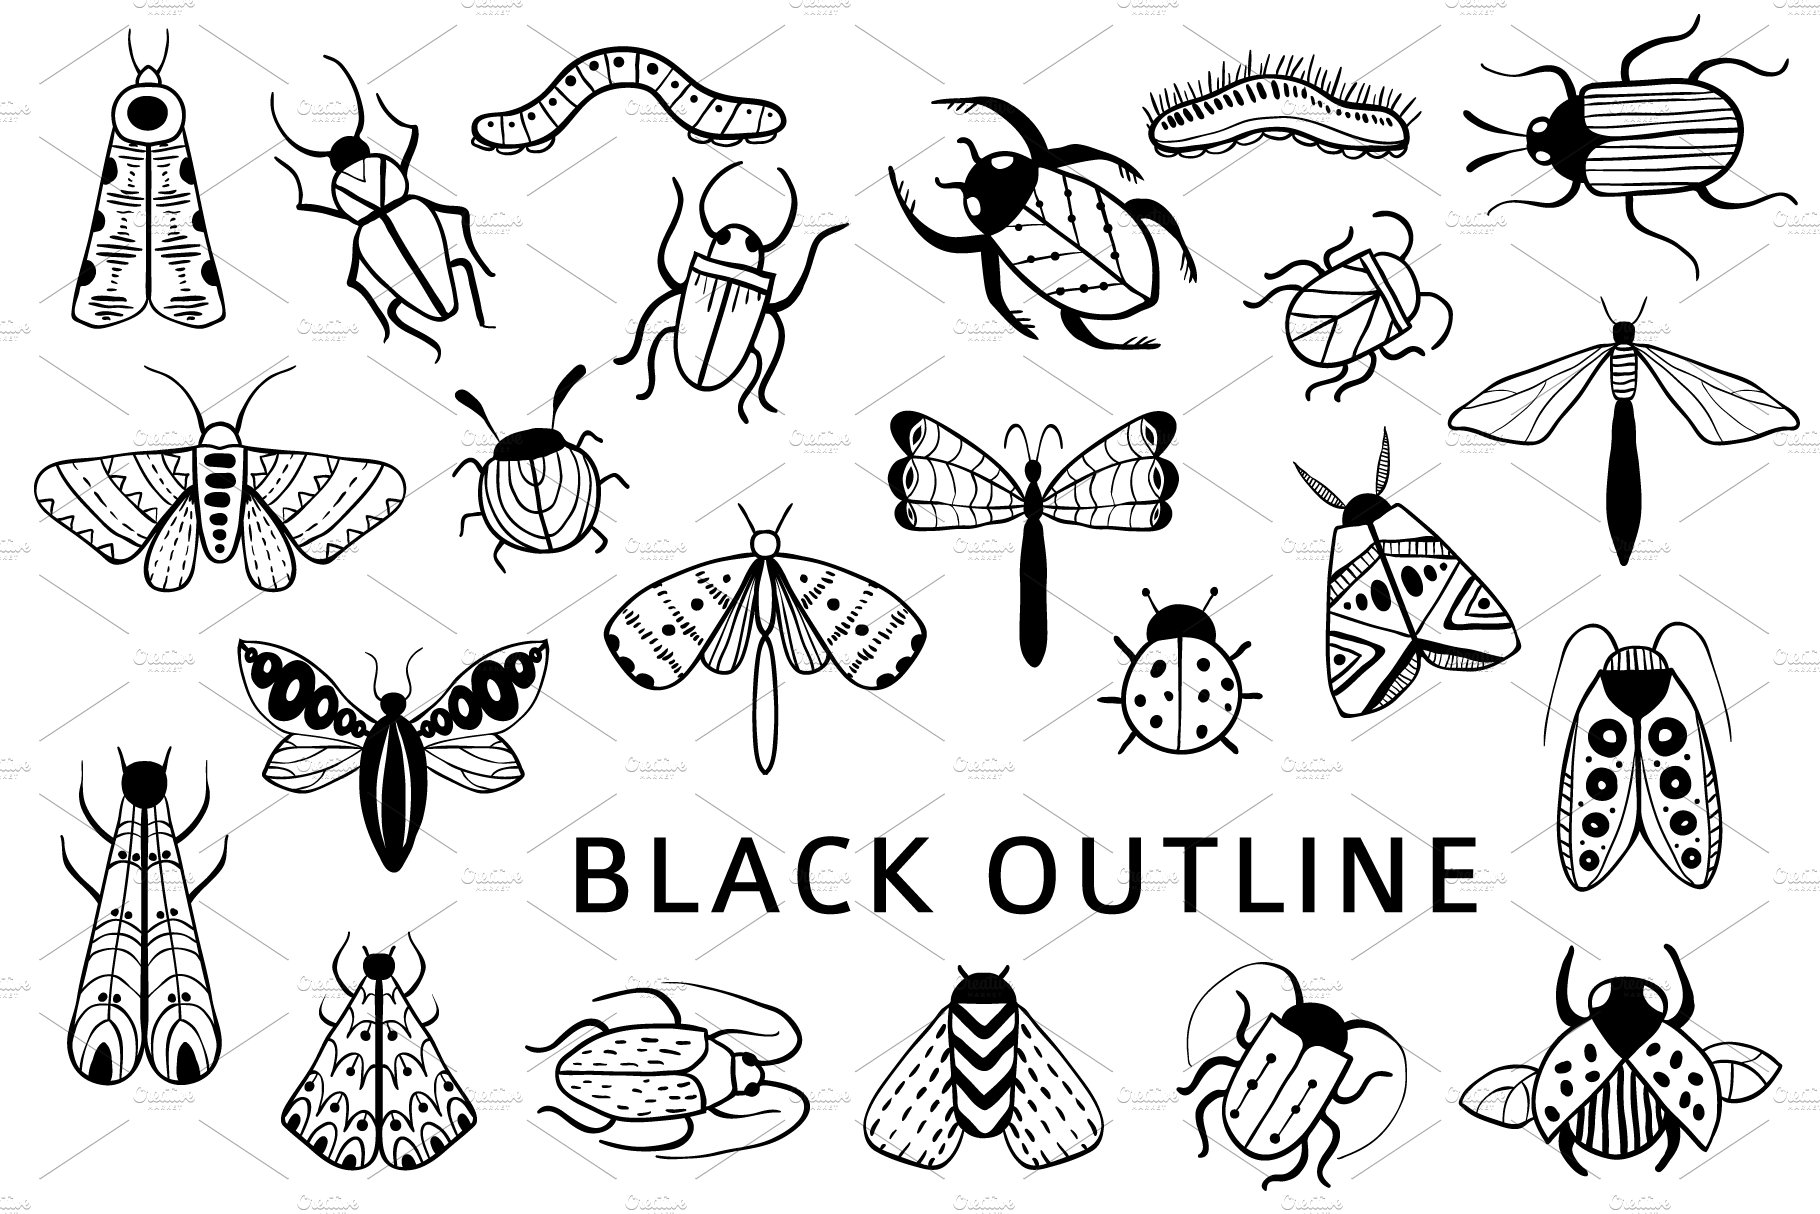 Black outline insects.